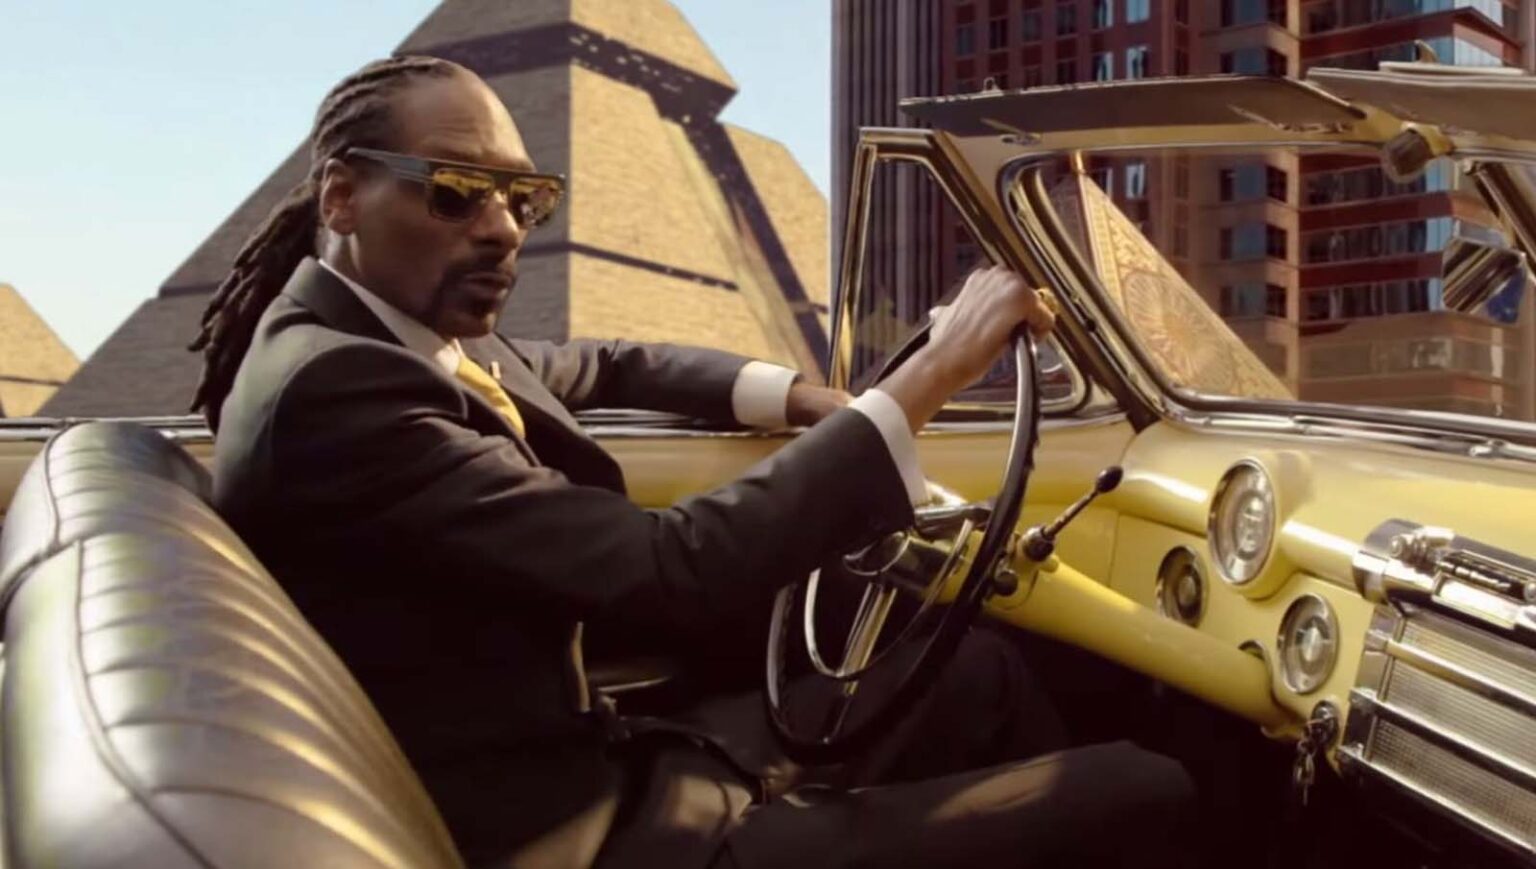 Snoop Dogg is always finding ways to flex his hearty net worth. Check out his dope car collection to understand how he uses his moolah.